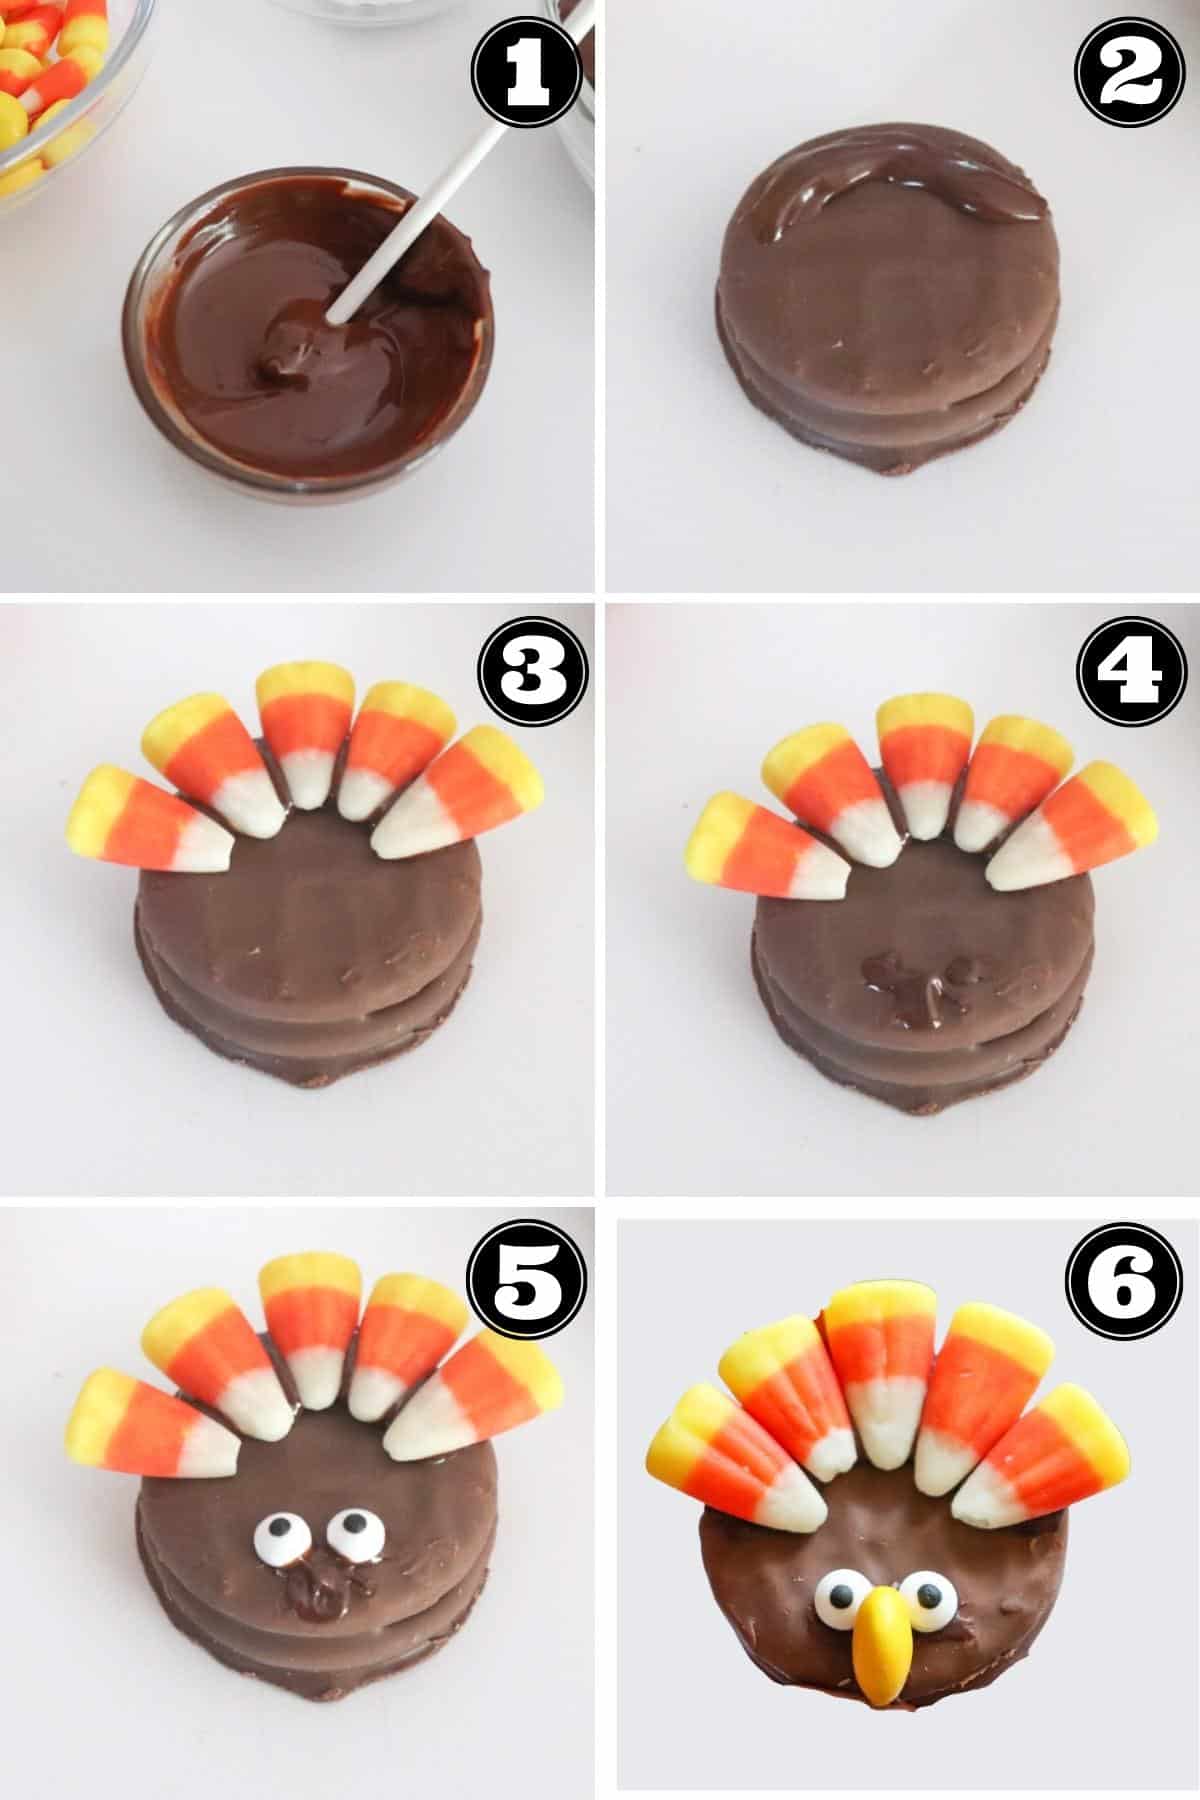 Images of steps to make nutter butter turkey cookies.